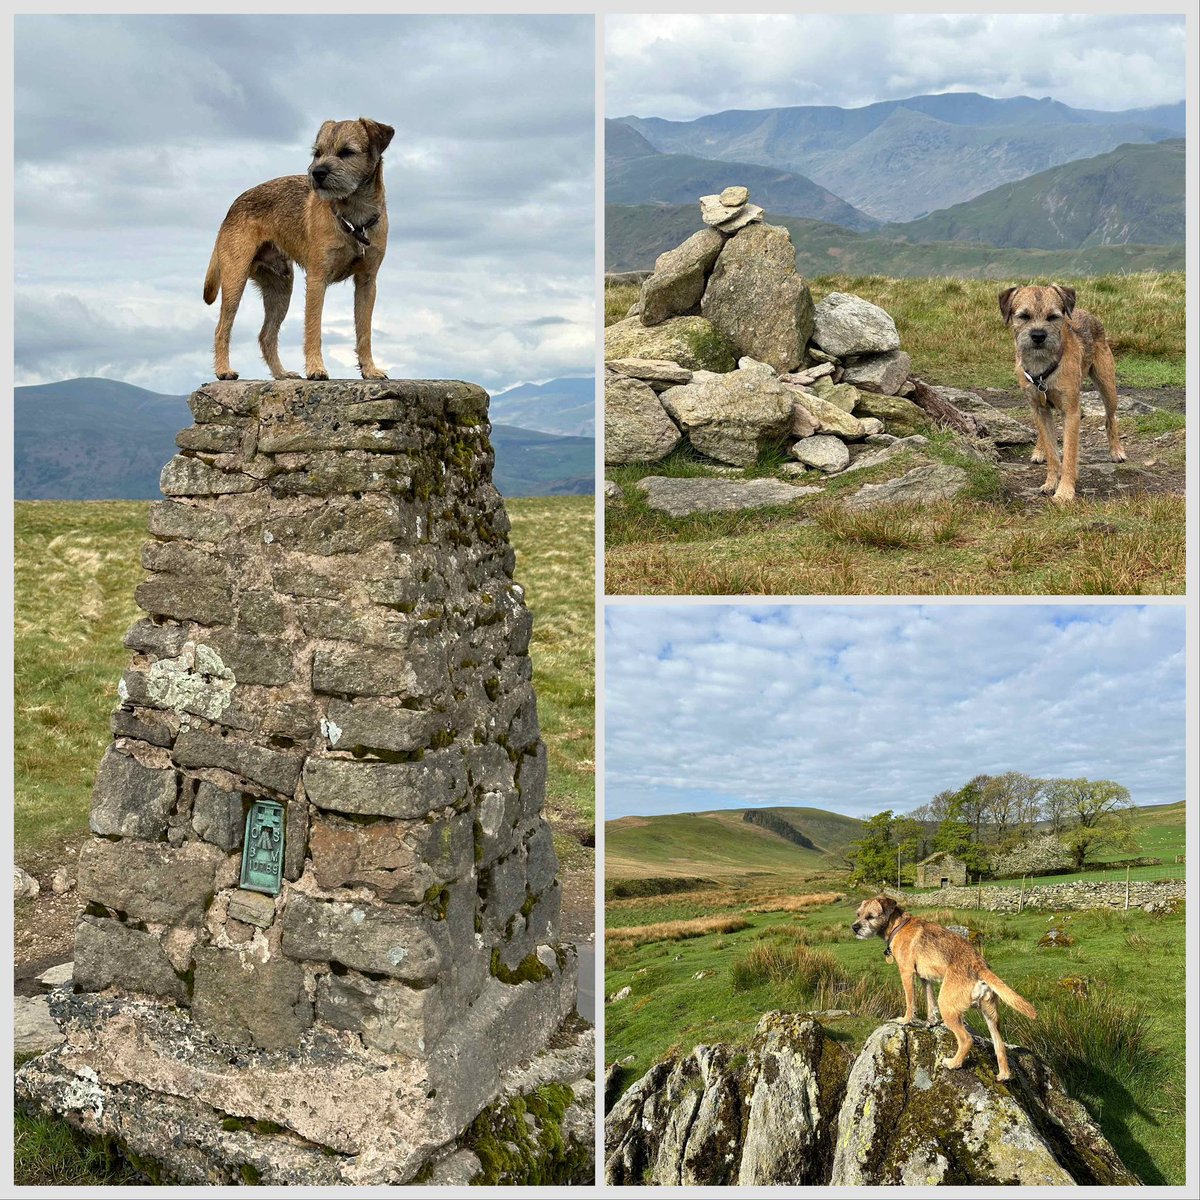 Out on the moorland tops of the Far Eastern Fells today. Lots of skylarks and a giant hare! #BTposse #cumbria #lakedistrict